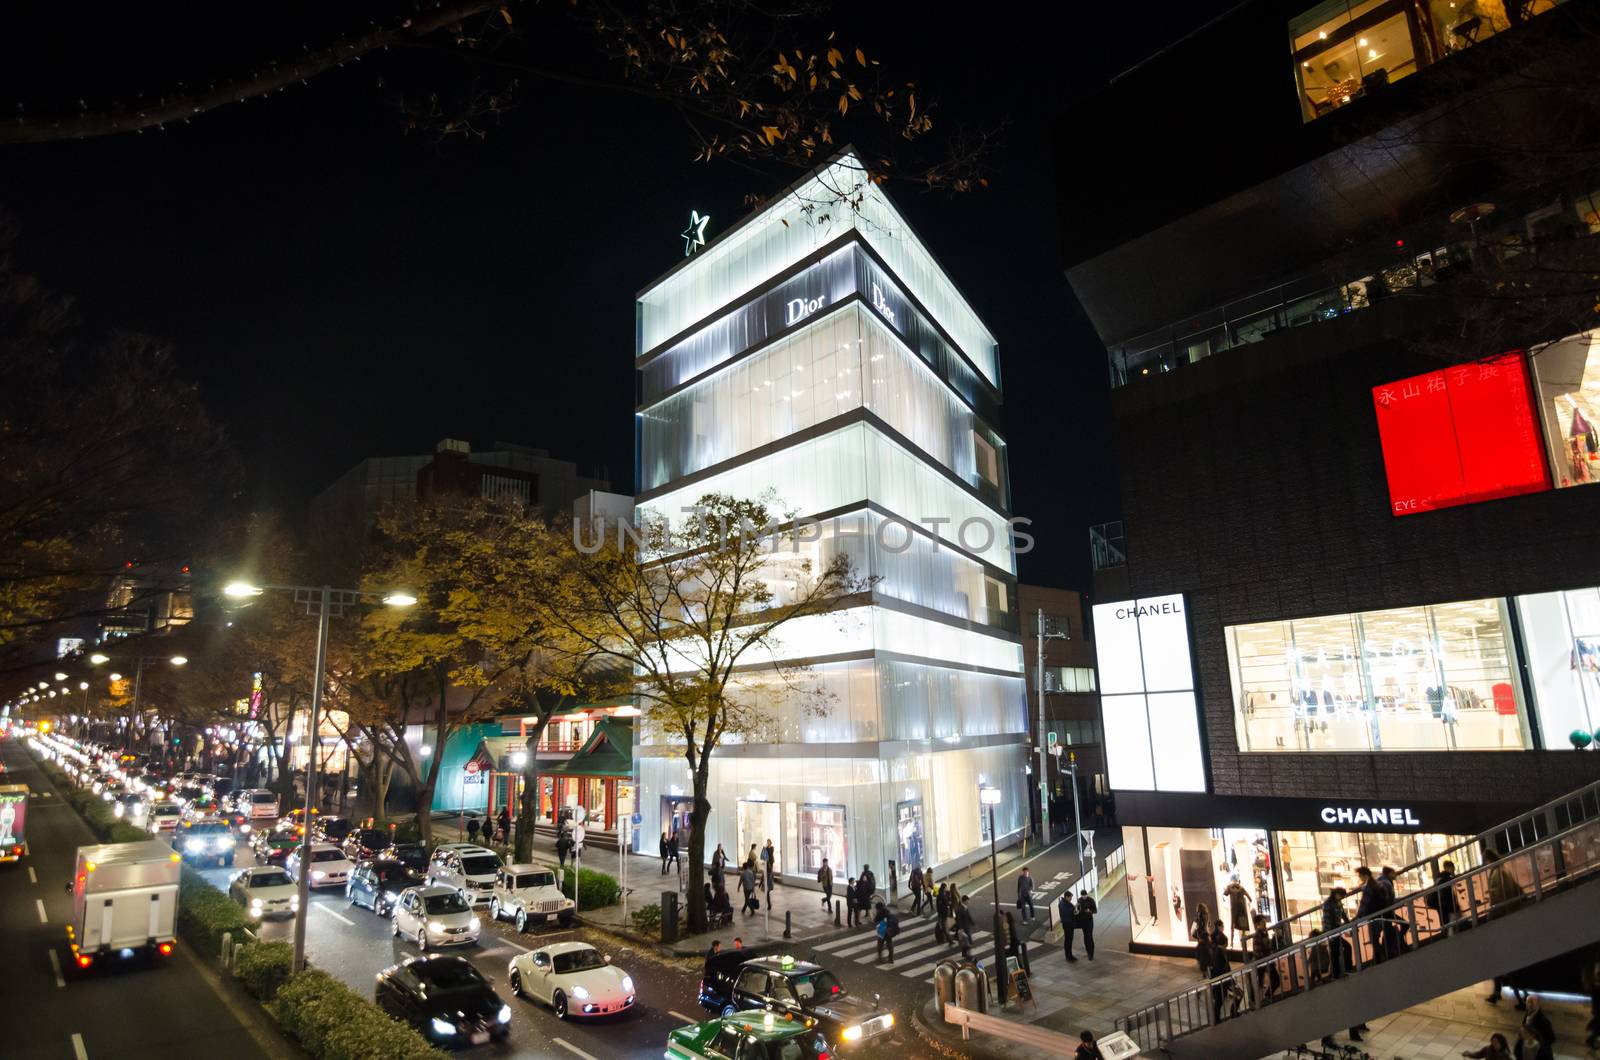 Tokyo, Japan - November 24, 2013: Tourists shopping on Omotesando Street at night on November 24. 2013, Omotesando street sometimes referred to as Tokyo's Champs-Elysees. Here you can find famous brand name shops, cafes and restaurants for a more adult clientele. 